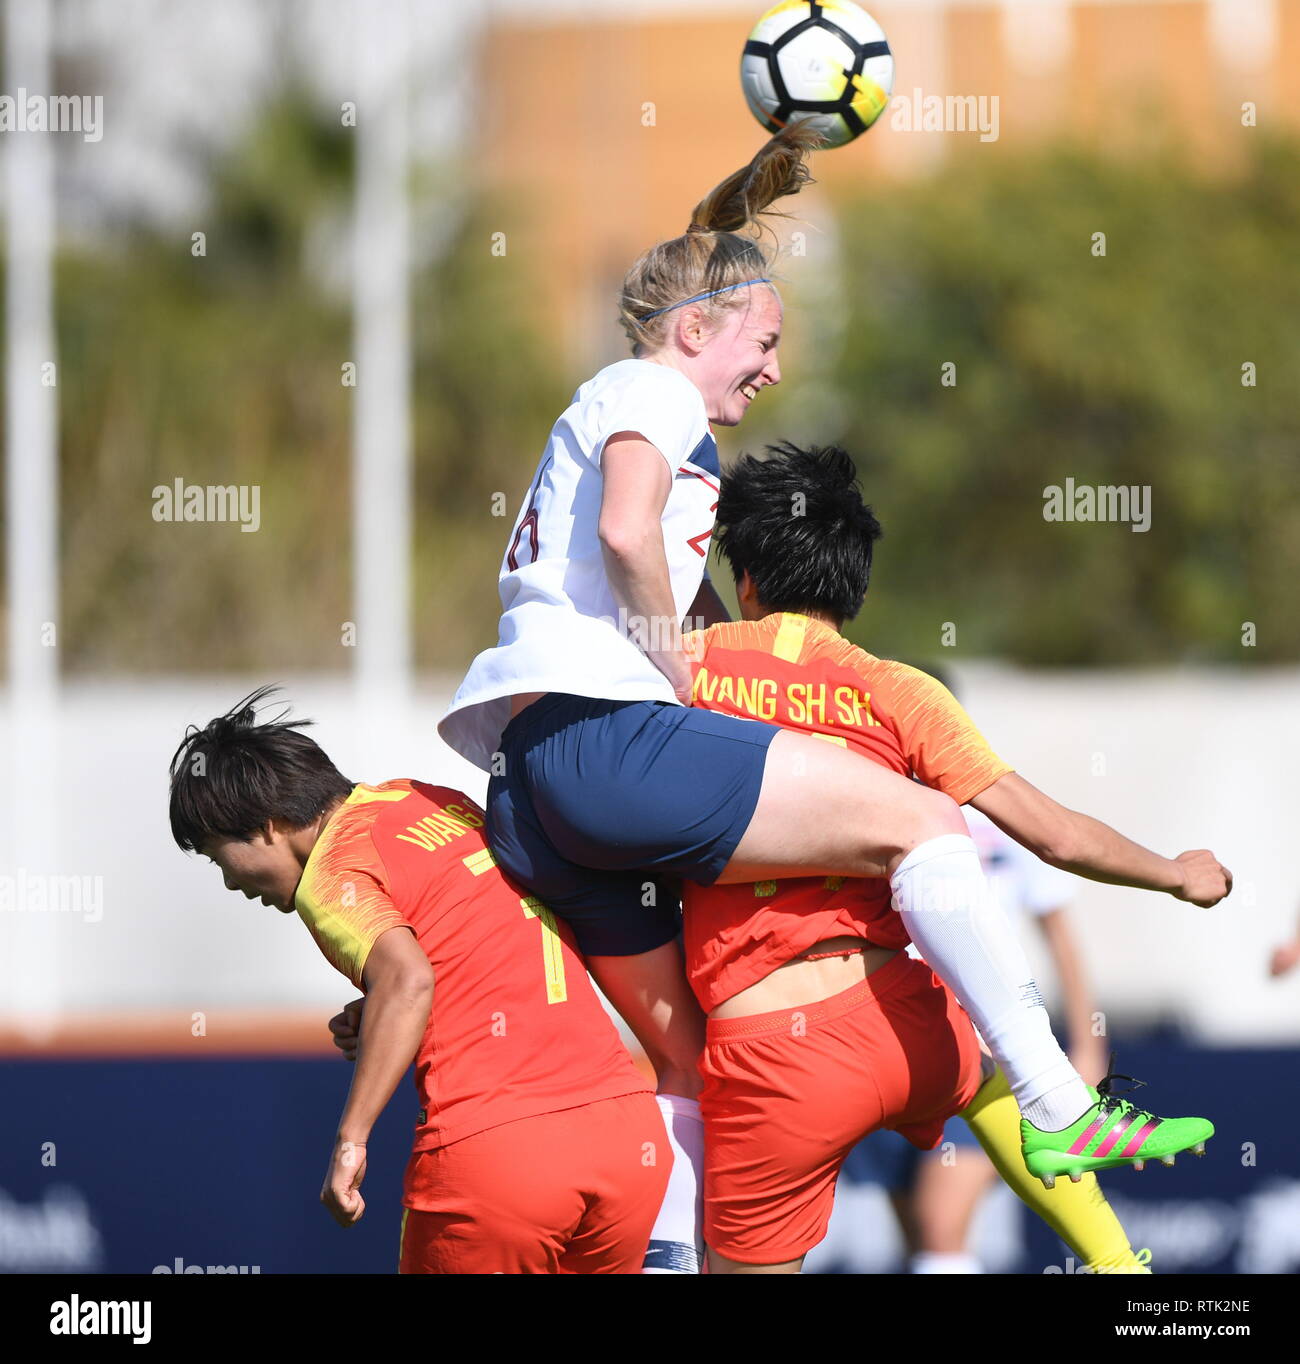 Albufeira, Portugal. 1st Mar, 2019. Norway's Ina Gausdal (Top) heads for the ball with China's Wang Shanshan (R) and Wang Shuang during the Group C match at the 2019 Algarve Cup women's soccer invitational tournament in Albufeira, Portugal, March 1, 2019. Norway won 3-1. Credit: Zhang Liyun/Xinhua/Alamy Live News Stock Photo